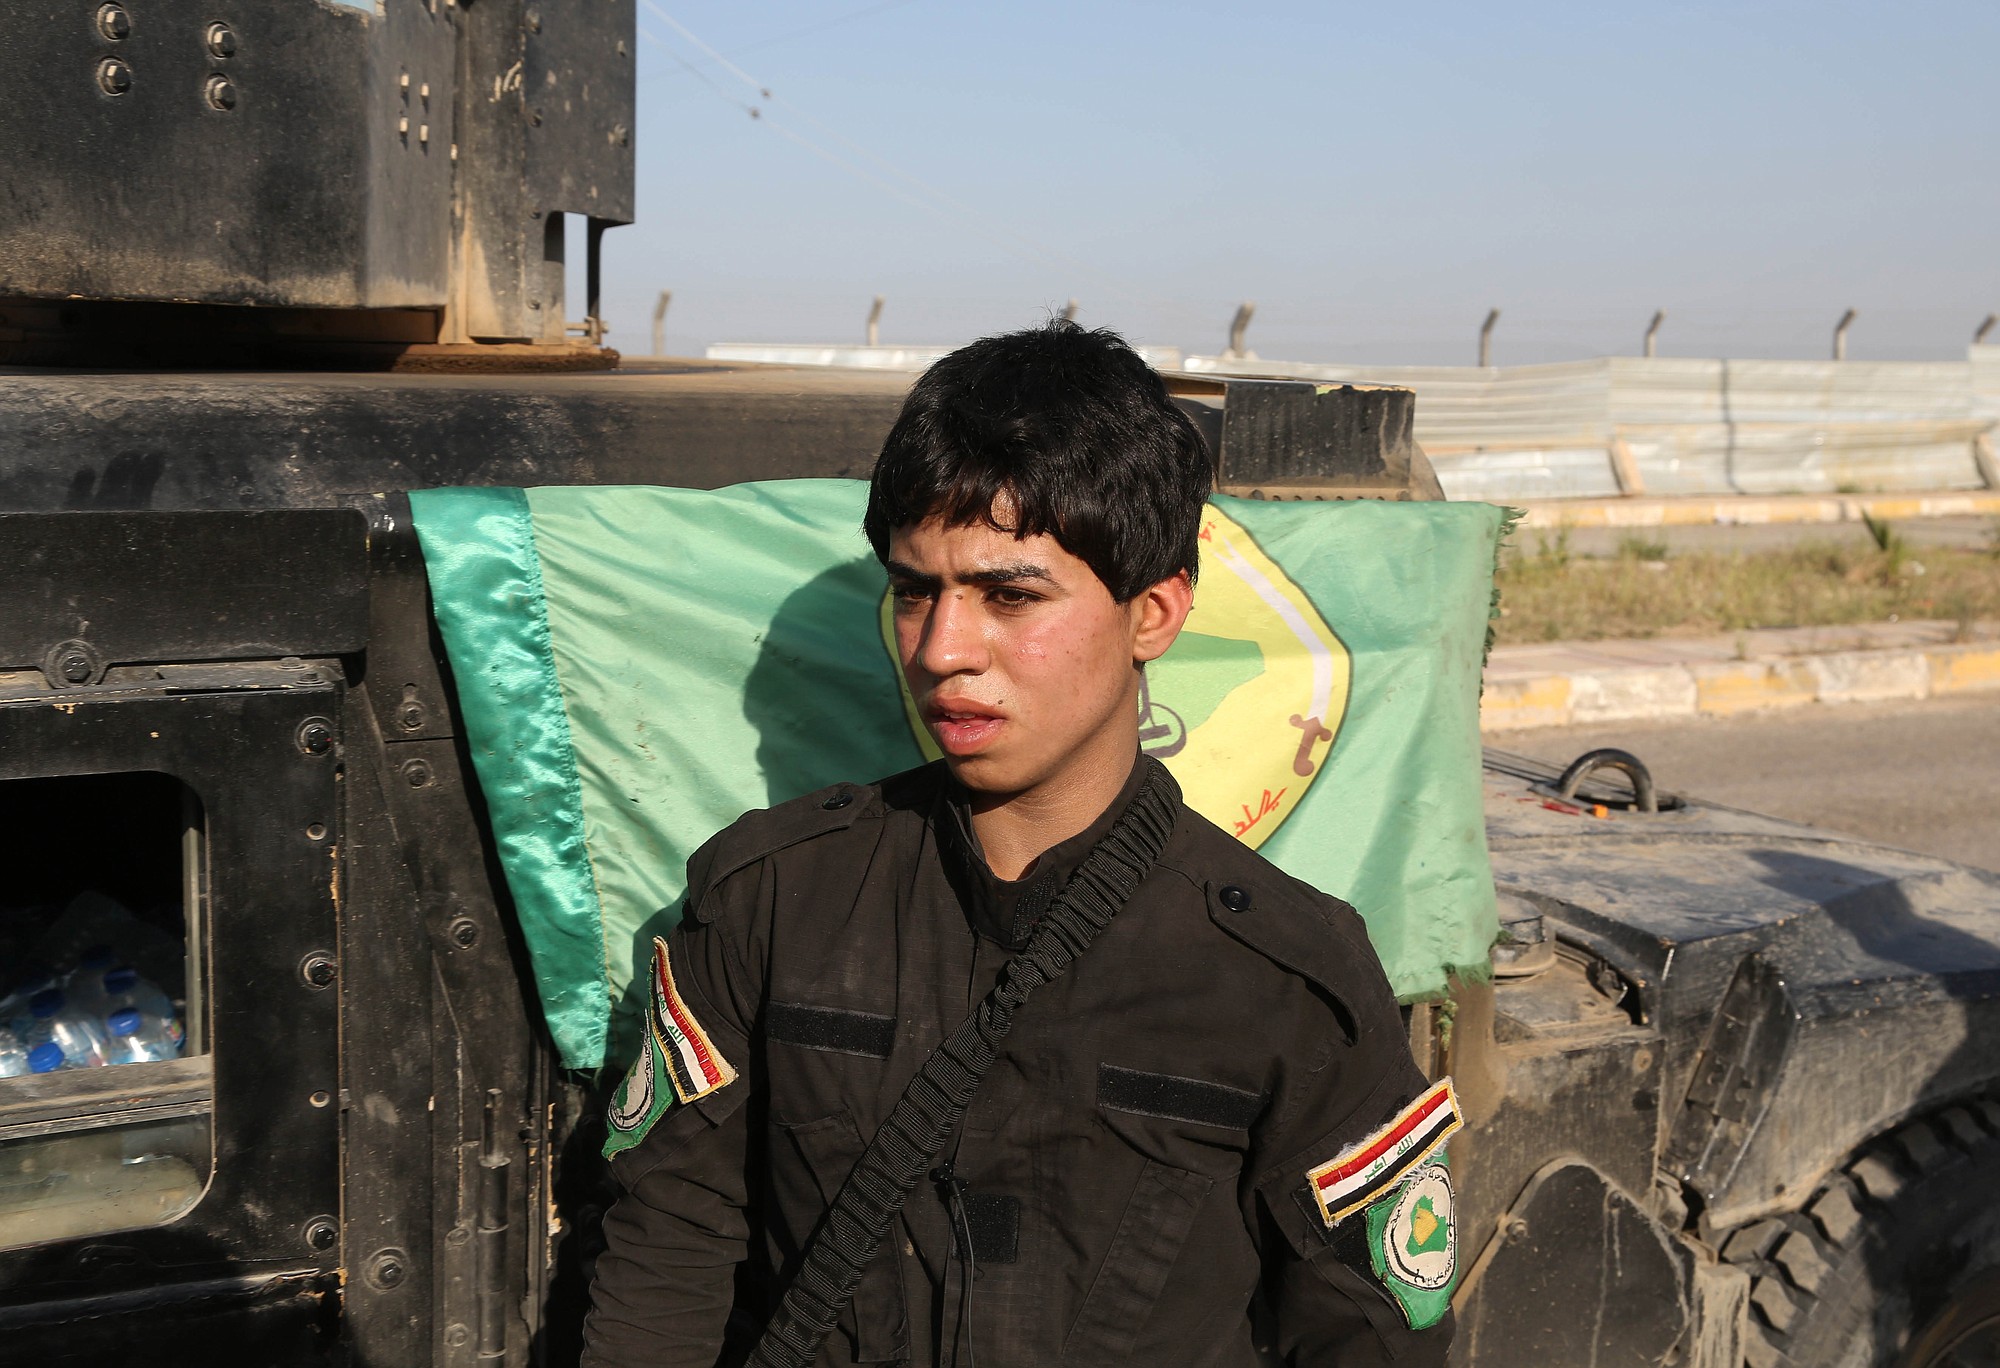 A young Shiite volunteer militiaman stands near a vehicle on his way to the battlefield against Islamic State fighters in Tikrit, Iraq.